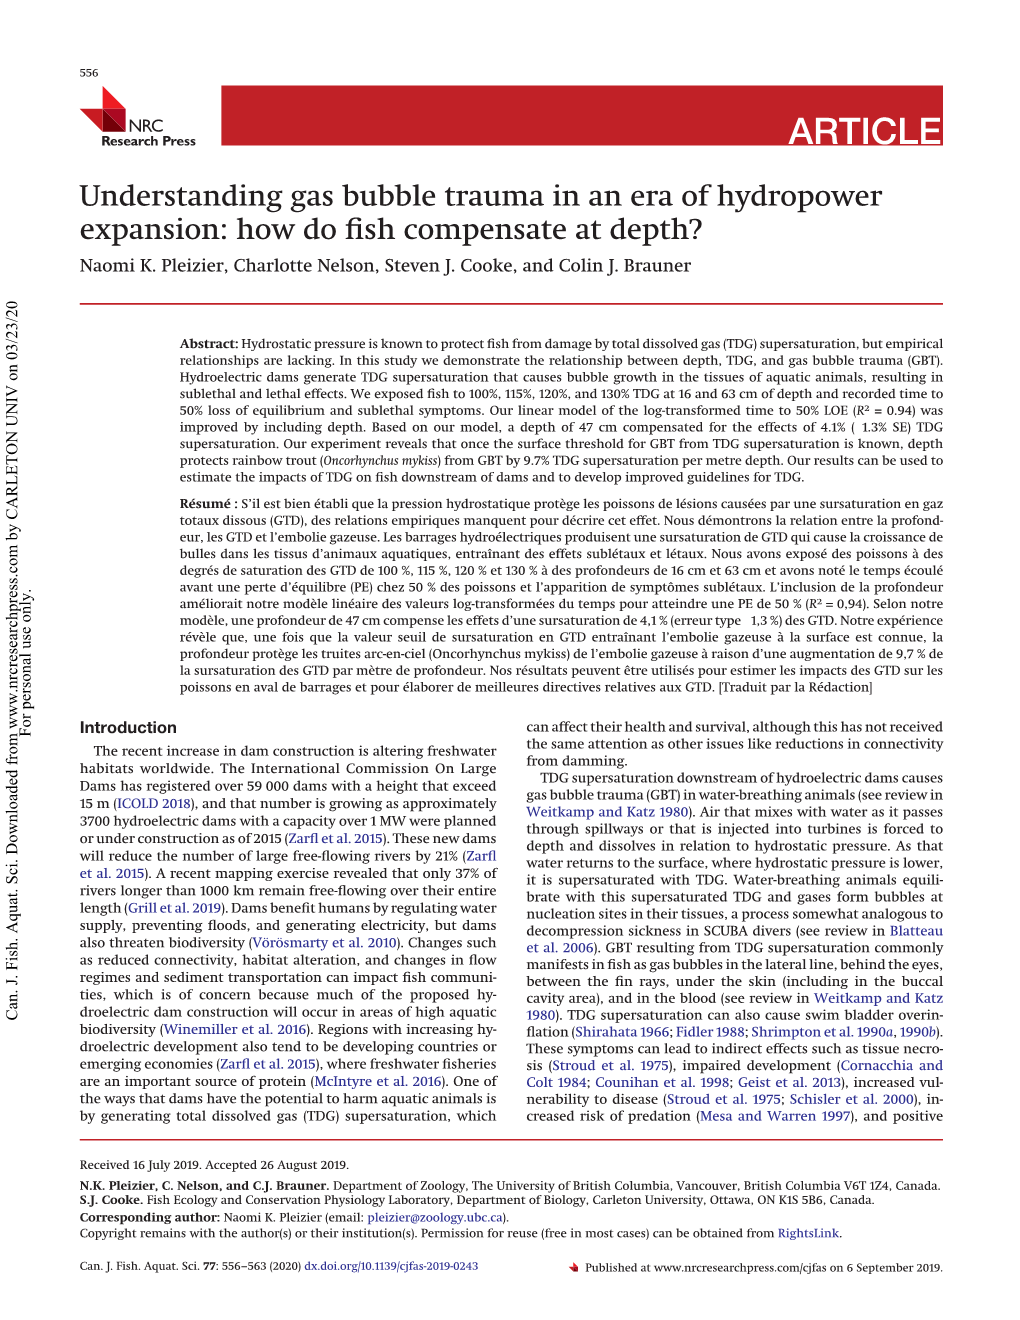 Understanding Gas Bubble Trauma in an Era of Hydropower Expansion: How Do Fish Compensate at Depth?